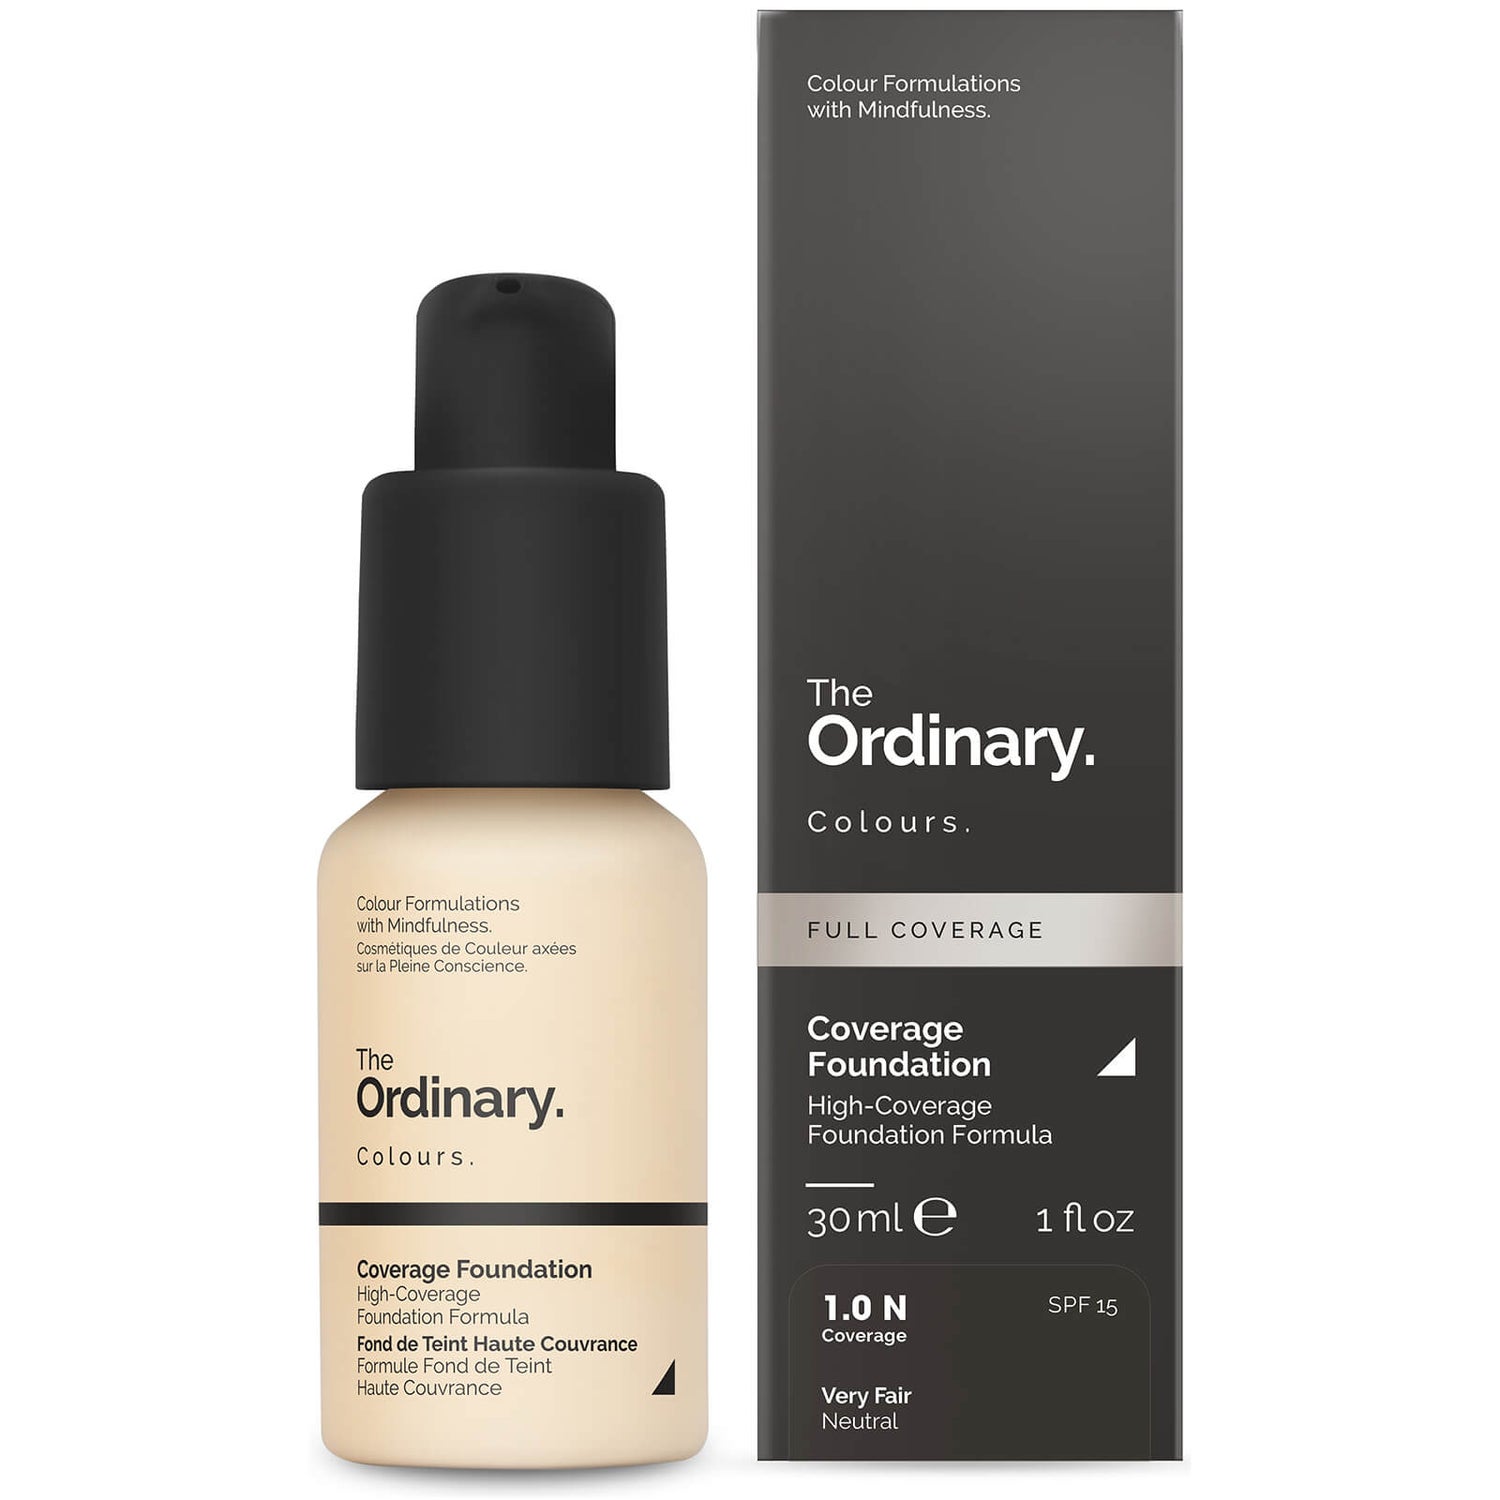 The Ordinary Coverage Foundation with SPF 15 by The Ordinary Colours 30ml (Various Shades) - 1.0N